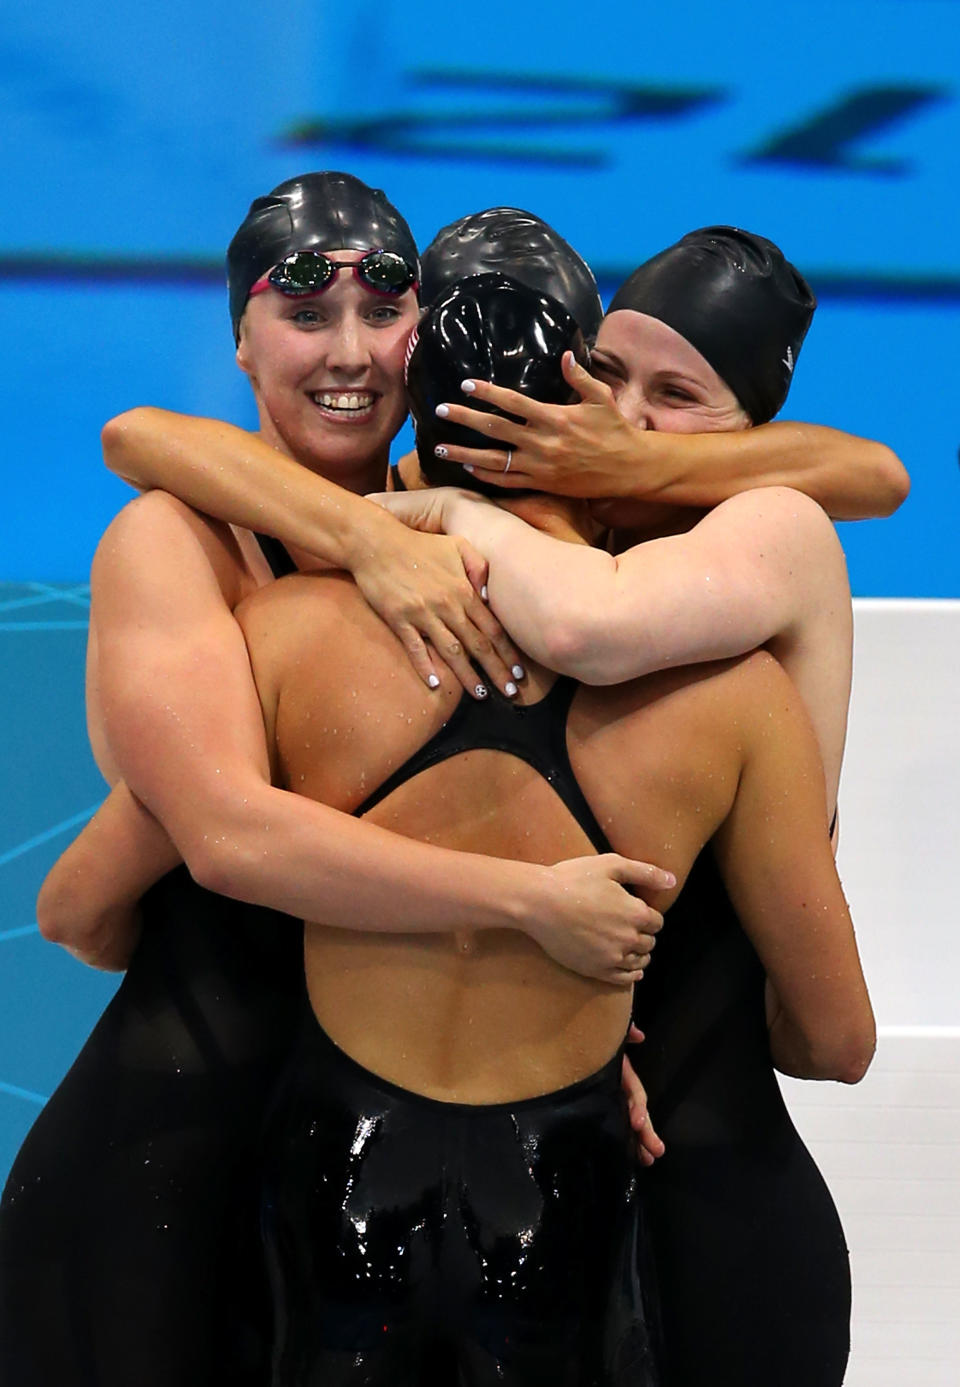 LONDON, ENGLAND - AUGUST 01: Shannon Vreeland (L), Missy Franklin (R), Allison Schmitt (C) and Dana Vollmer of the United States celebrate after they won the Final of the Women's 4x200m Freestyle Relay on Day 5 of the London 2012 Olympic Games at the Aquatics Centre on August 1, 2012 in London, England. (Photo by Alexander Hassenstein/Getty Images)